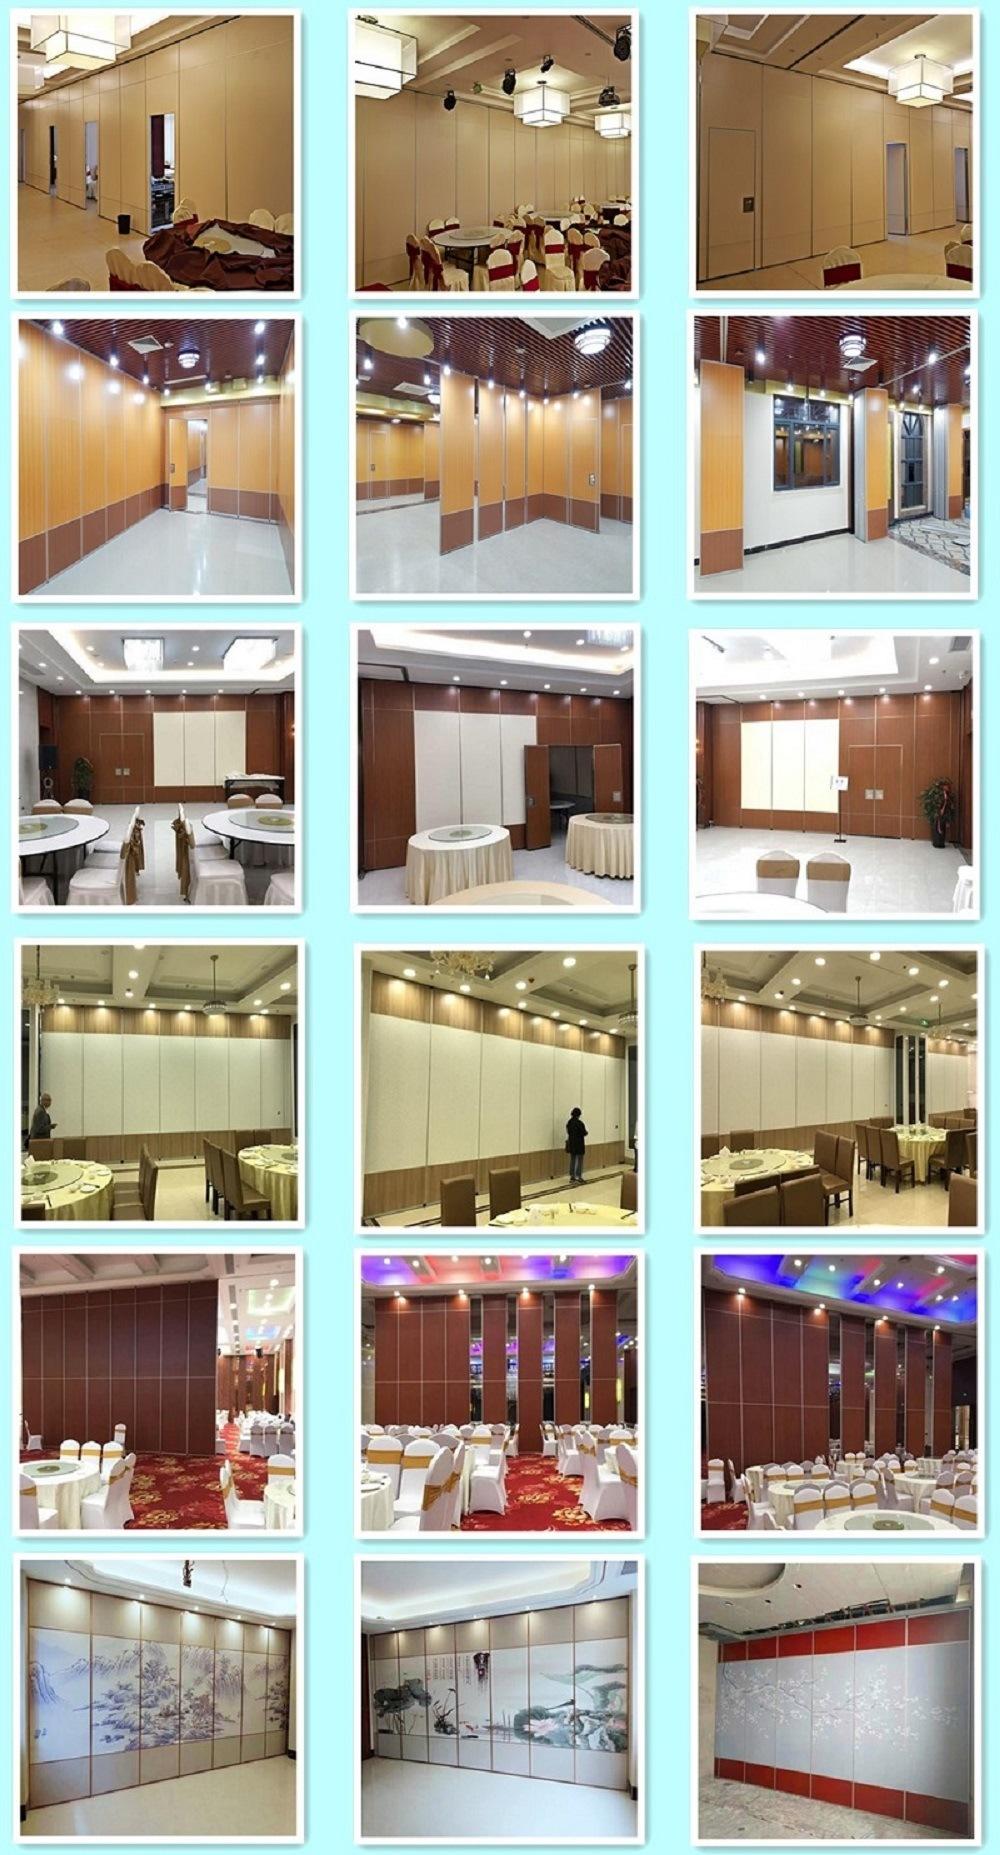 Office Sliding Wall Conference Room Acoustic Mobile Partition